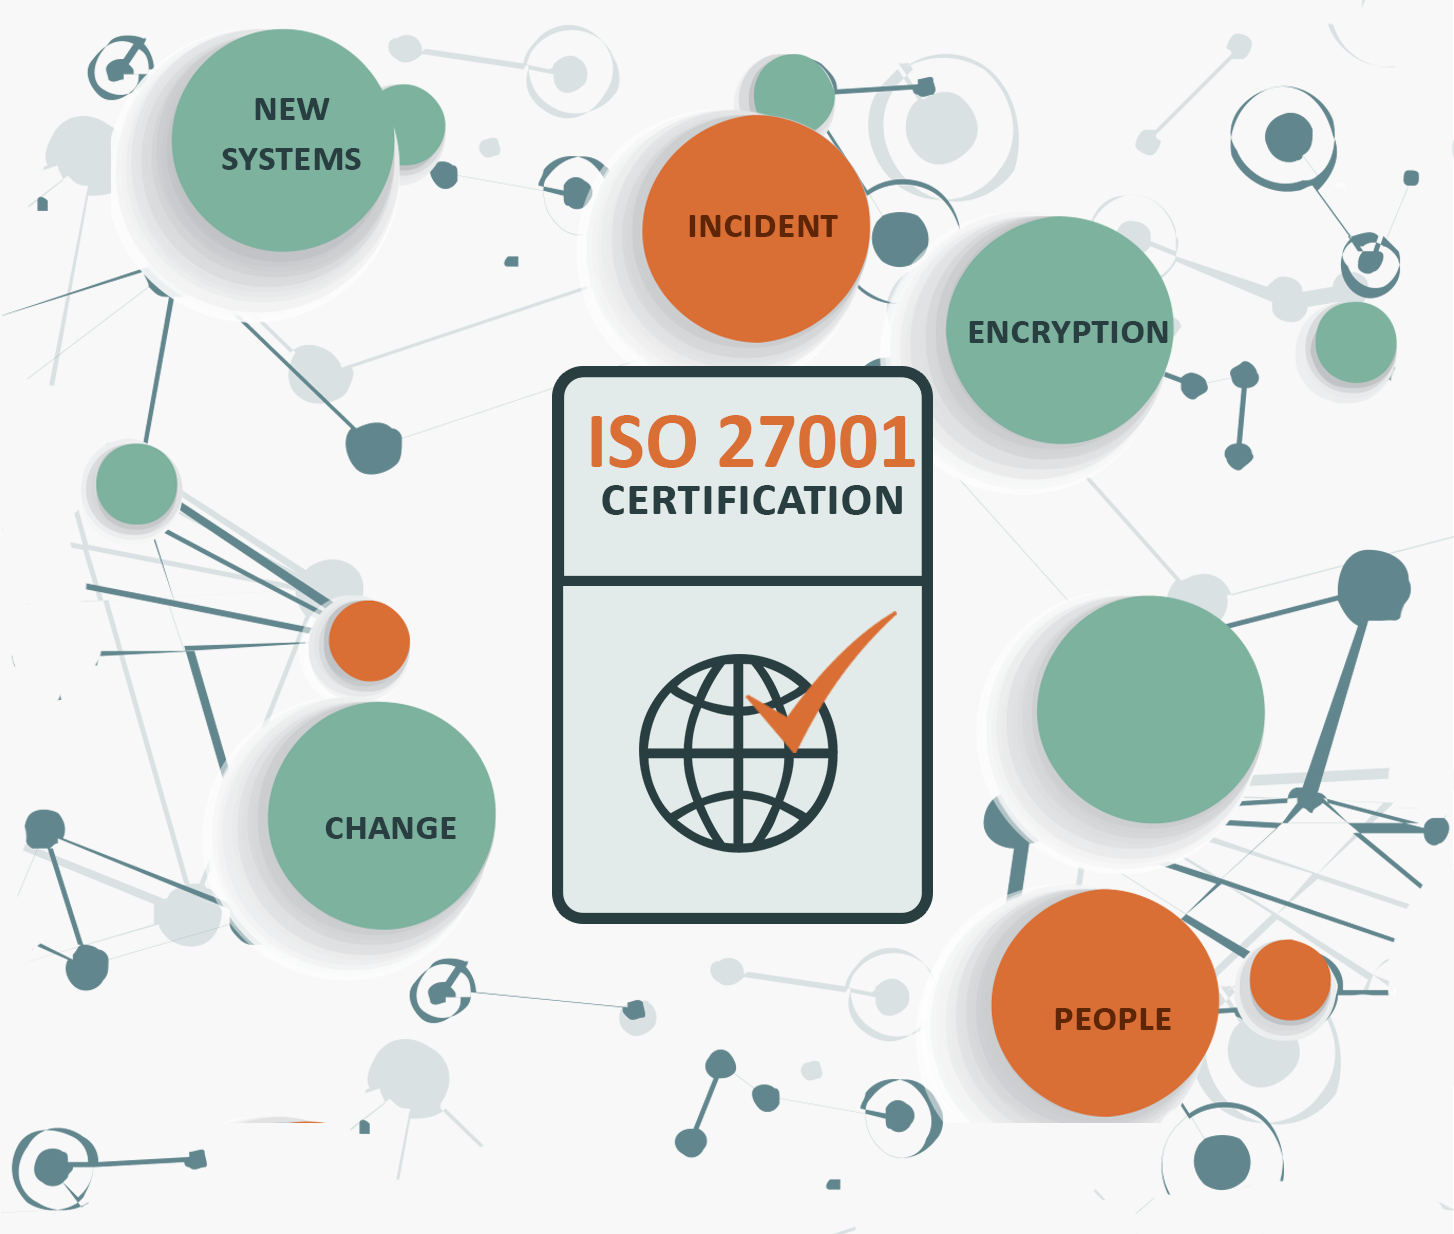 Achieve ISO 27001 Certification